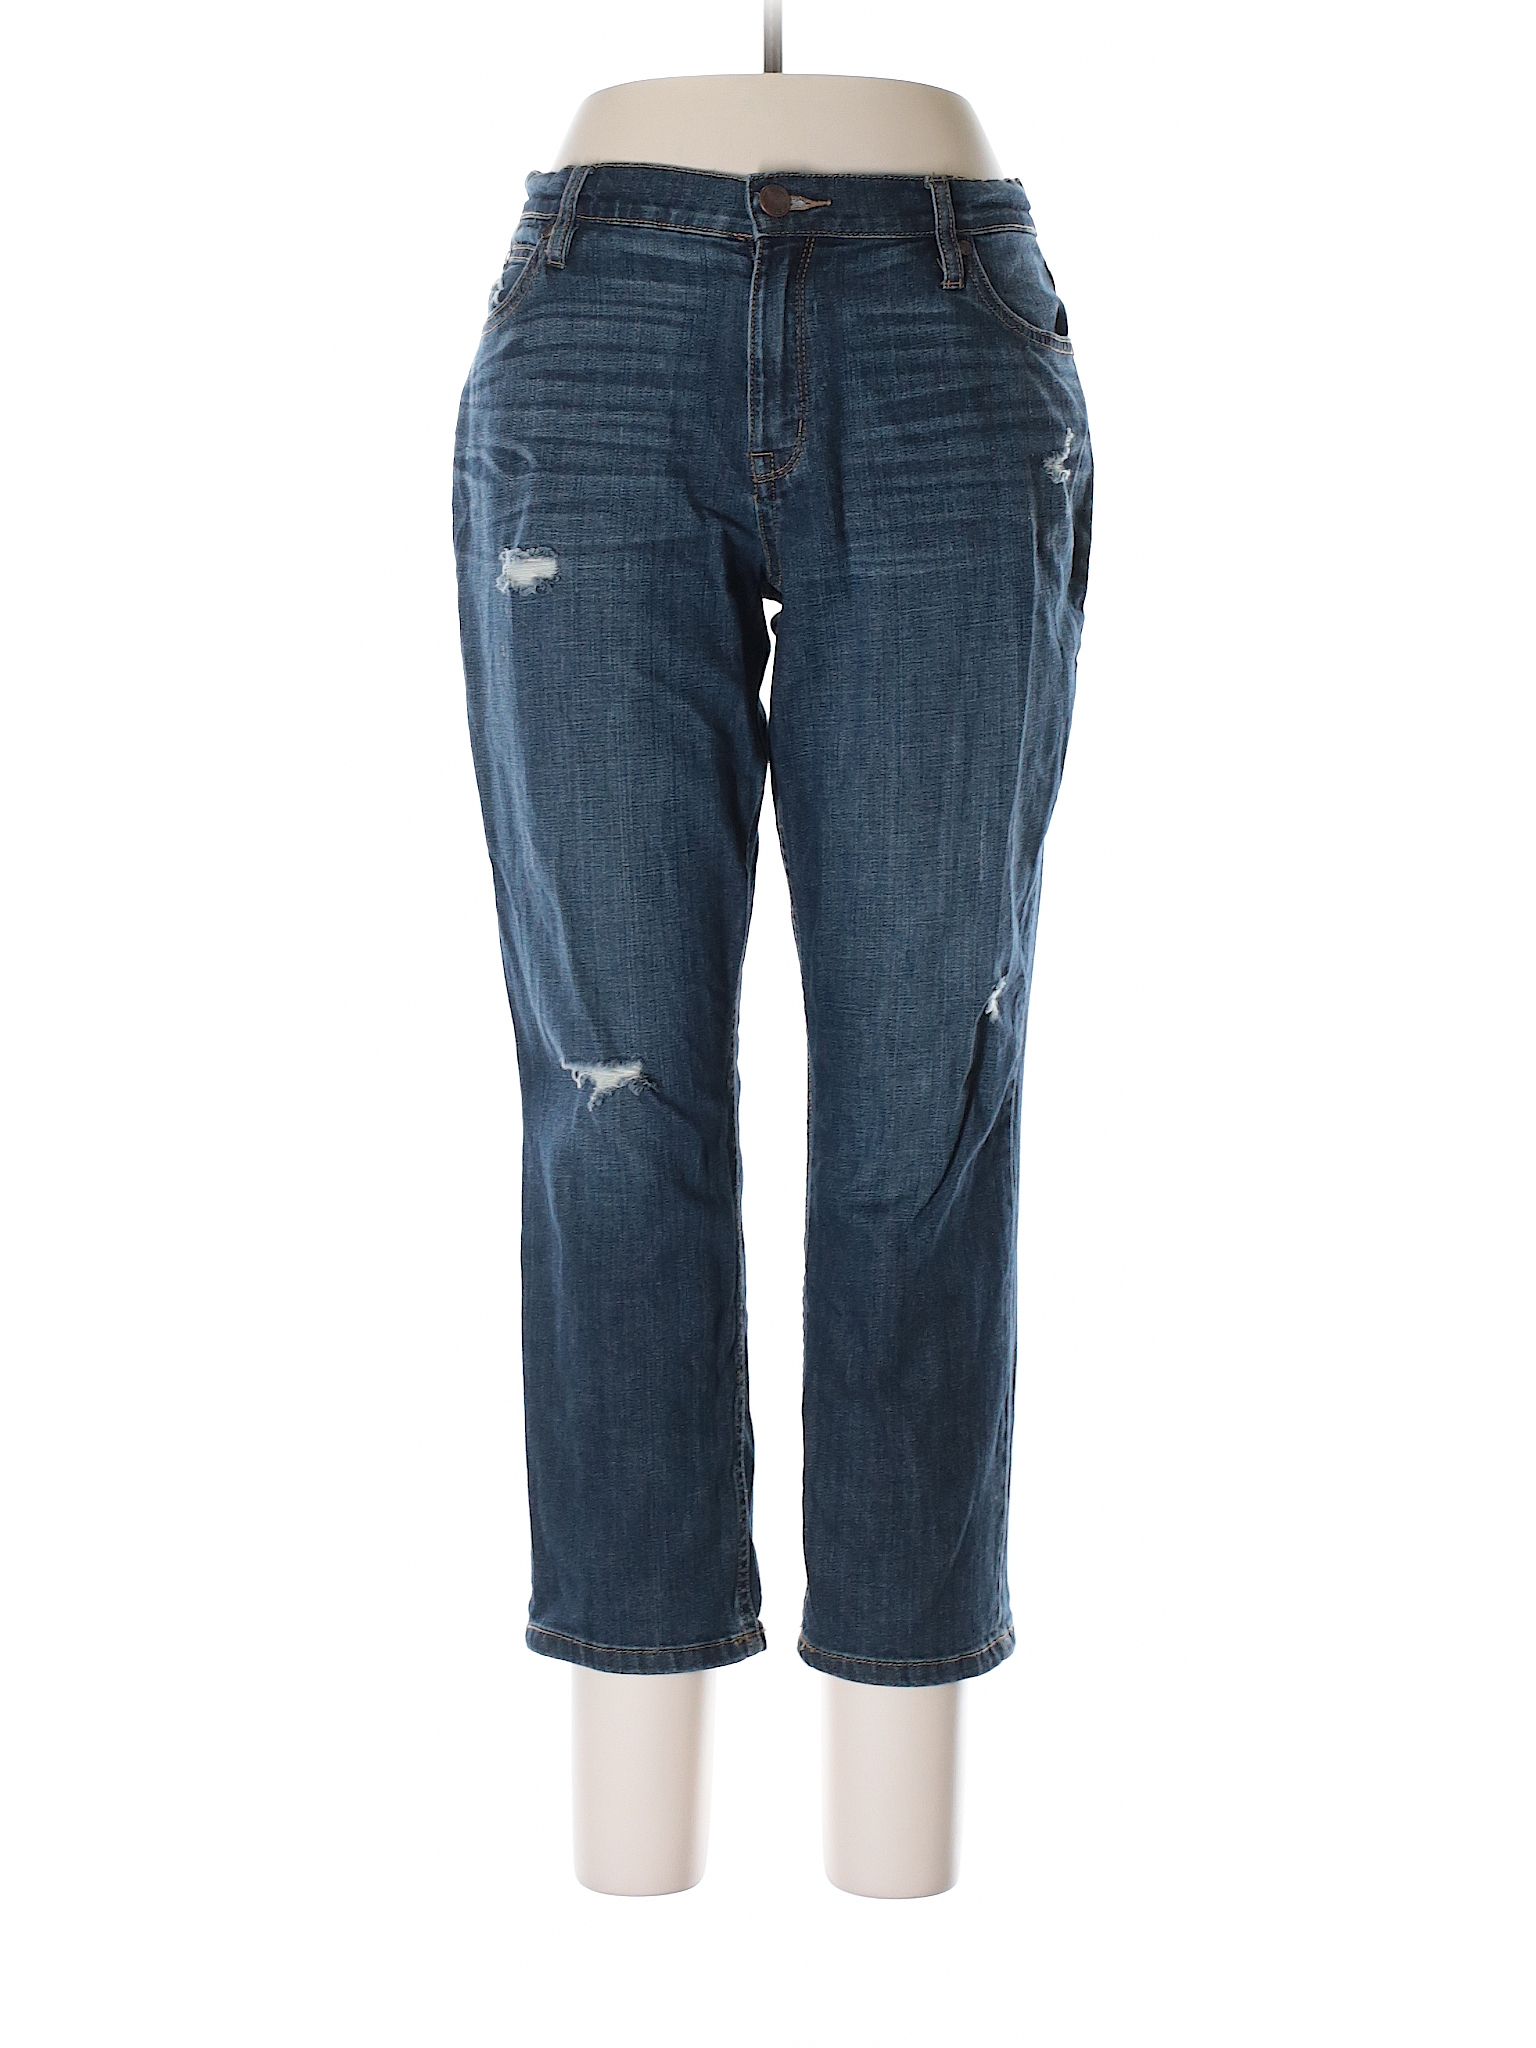 a.n.a. A New Approach Solid Dark Blue Jeans Size 12 - 72% off | thredUP